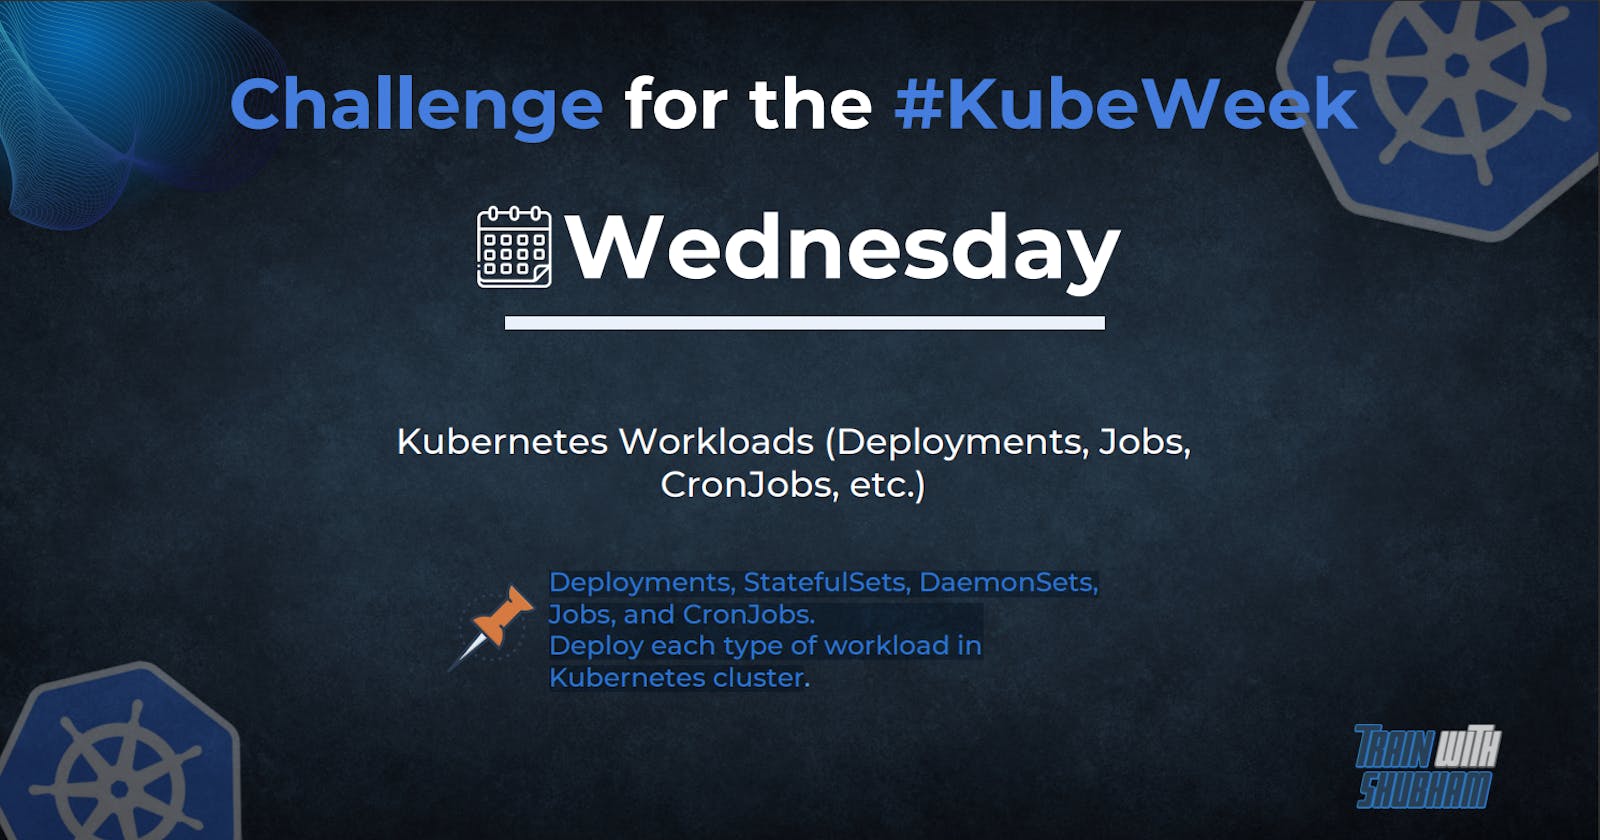 kubernetes Deployments, StatefulSets, DaemonSets,
Jobs and CronJobs. Deploy each type of workload in
Kubernetes cluster